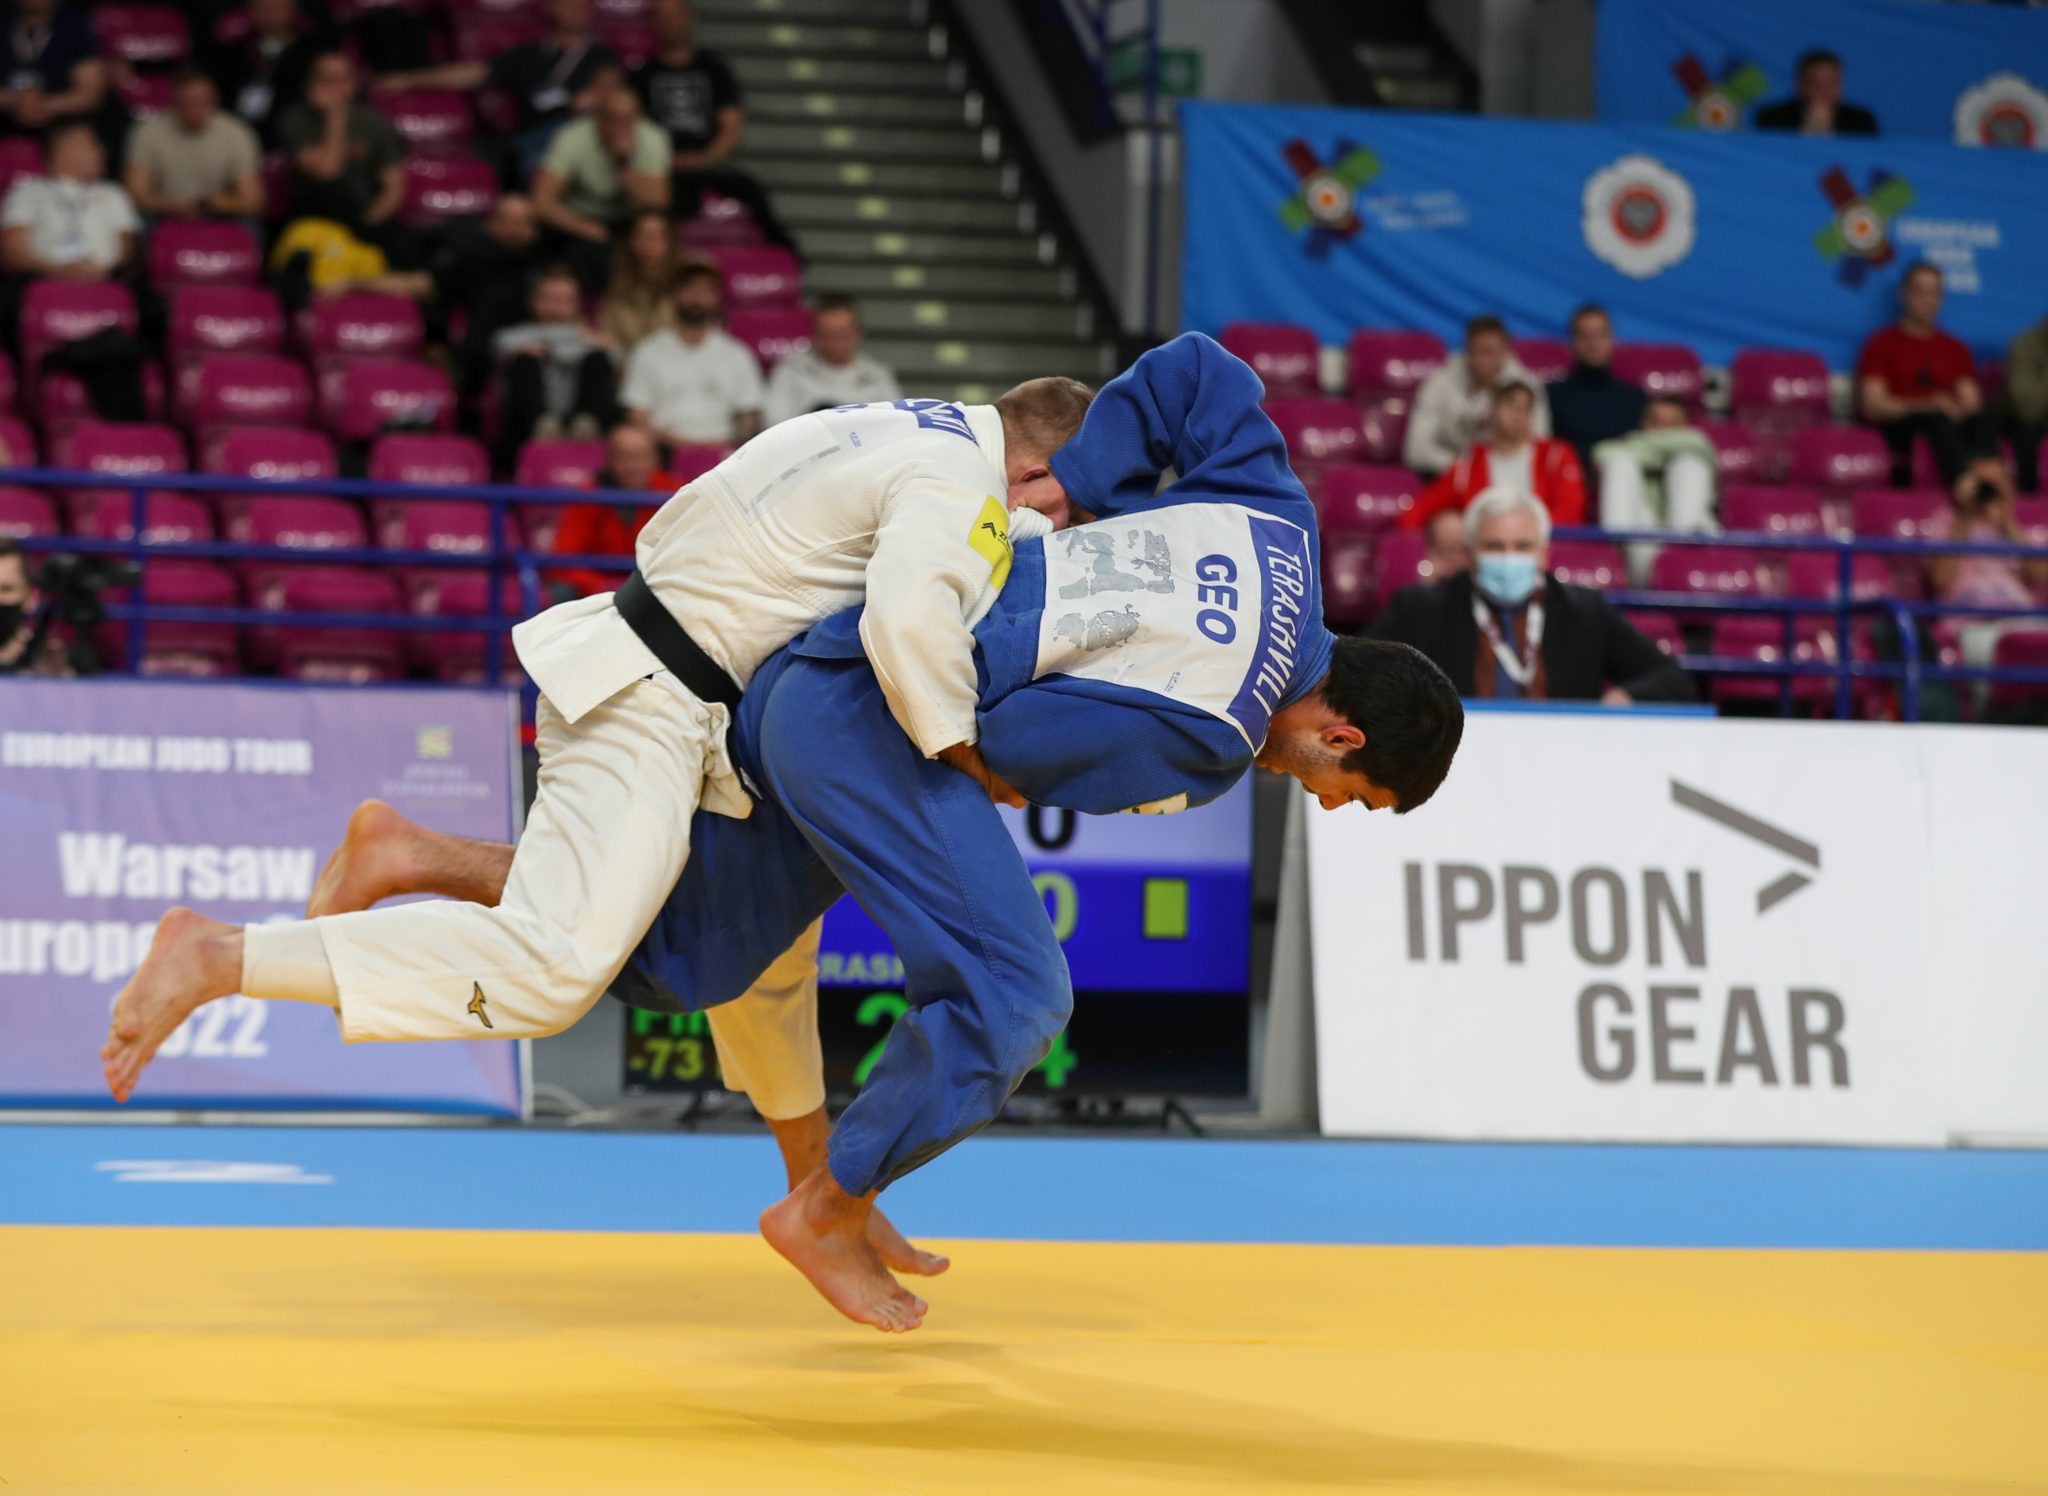 YOUNG TERASHVILI STUNS CROWD IN FINAL TO TAKE GOLD AND GAHIE IS BACK ON FORM